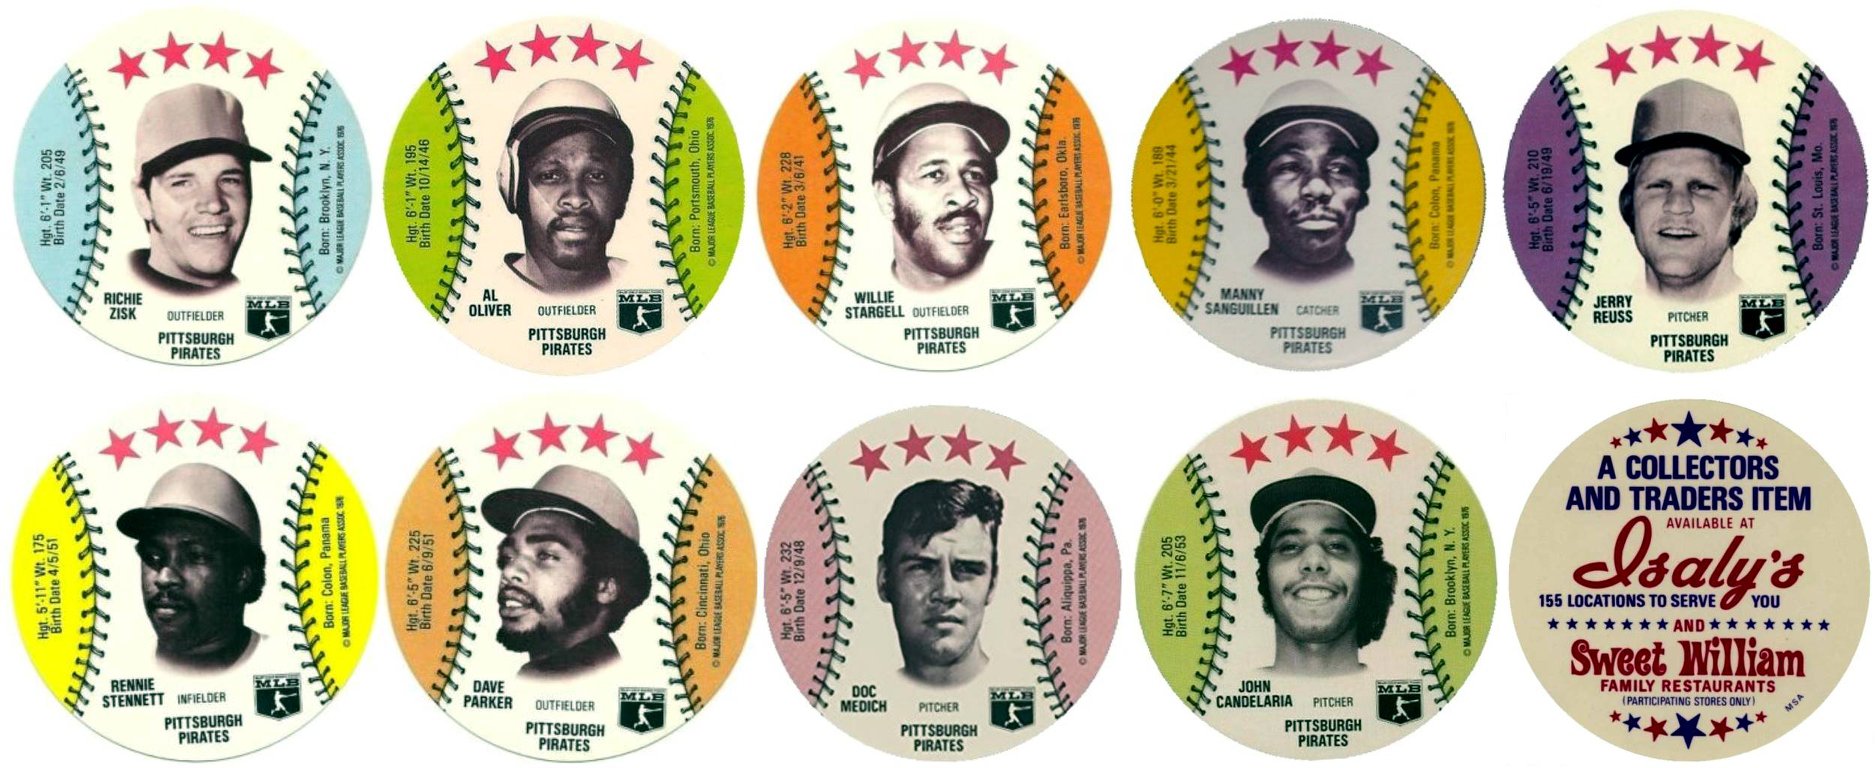 Pittsburgh Pirates - Isaly's Sweet William Collector Discs - 1976.